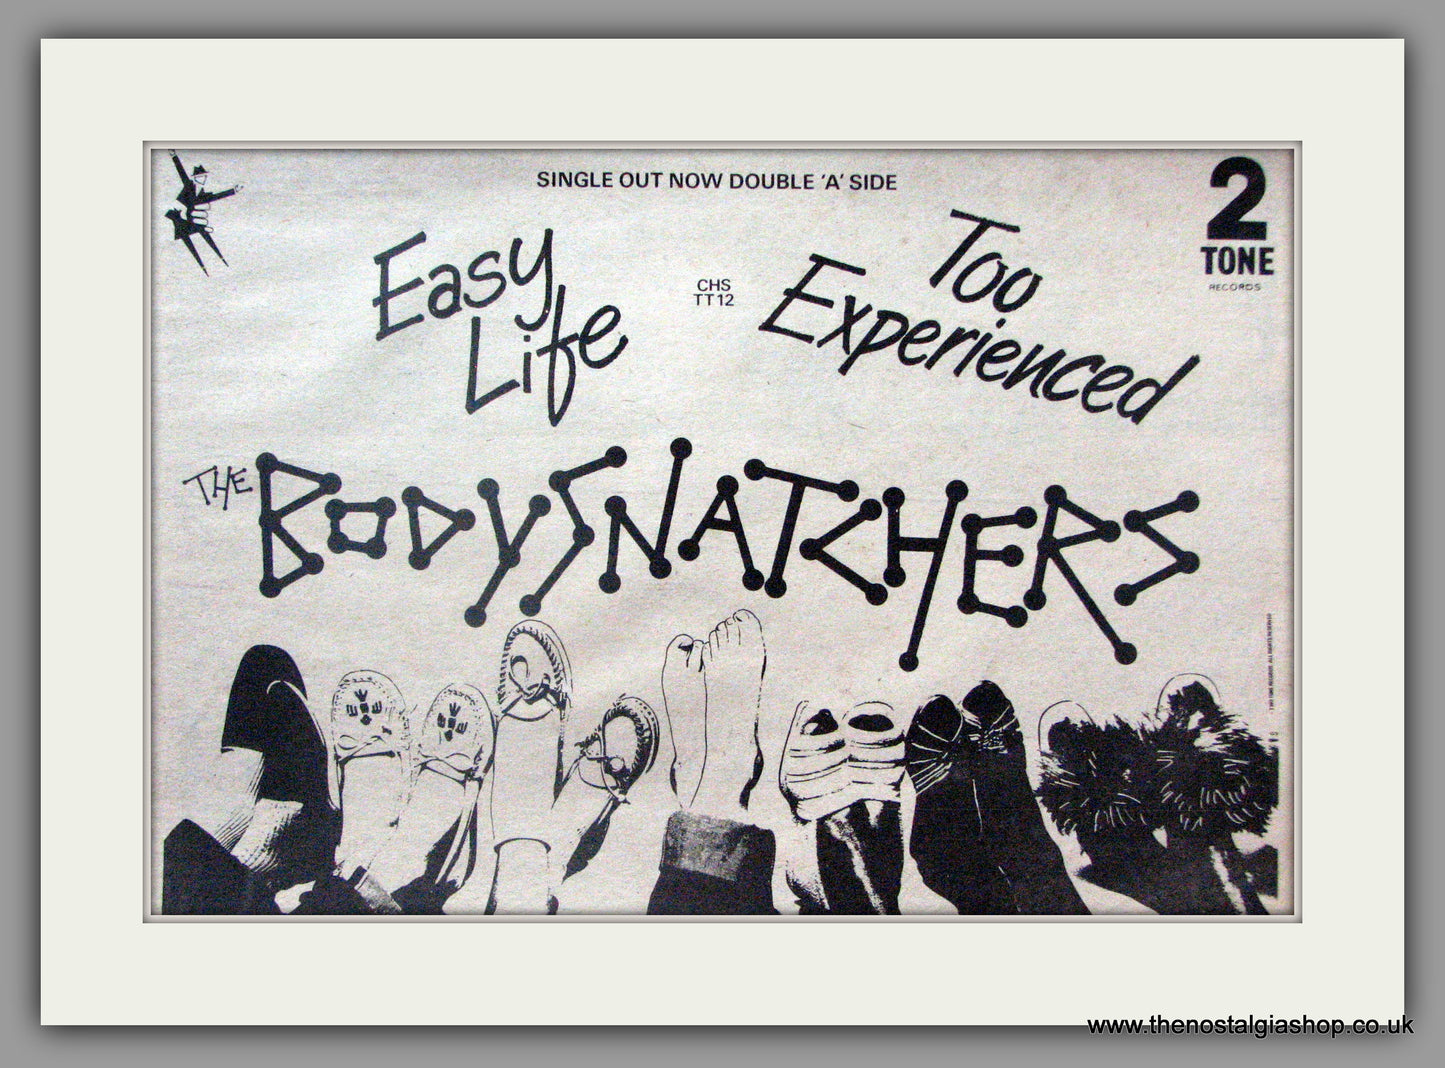 Bodysnatchers (The) Easy Life, Too Experienced. Vintage Advert 1980 (ref AD50524)